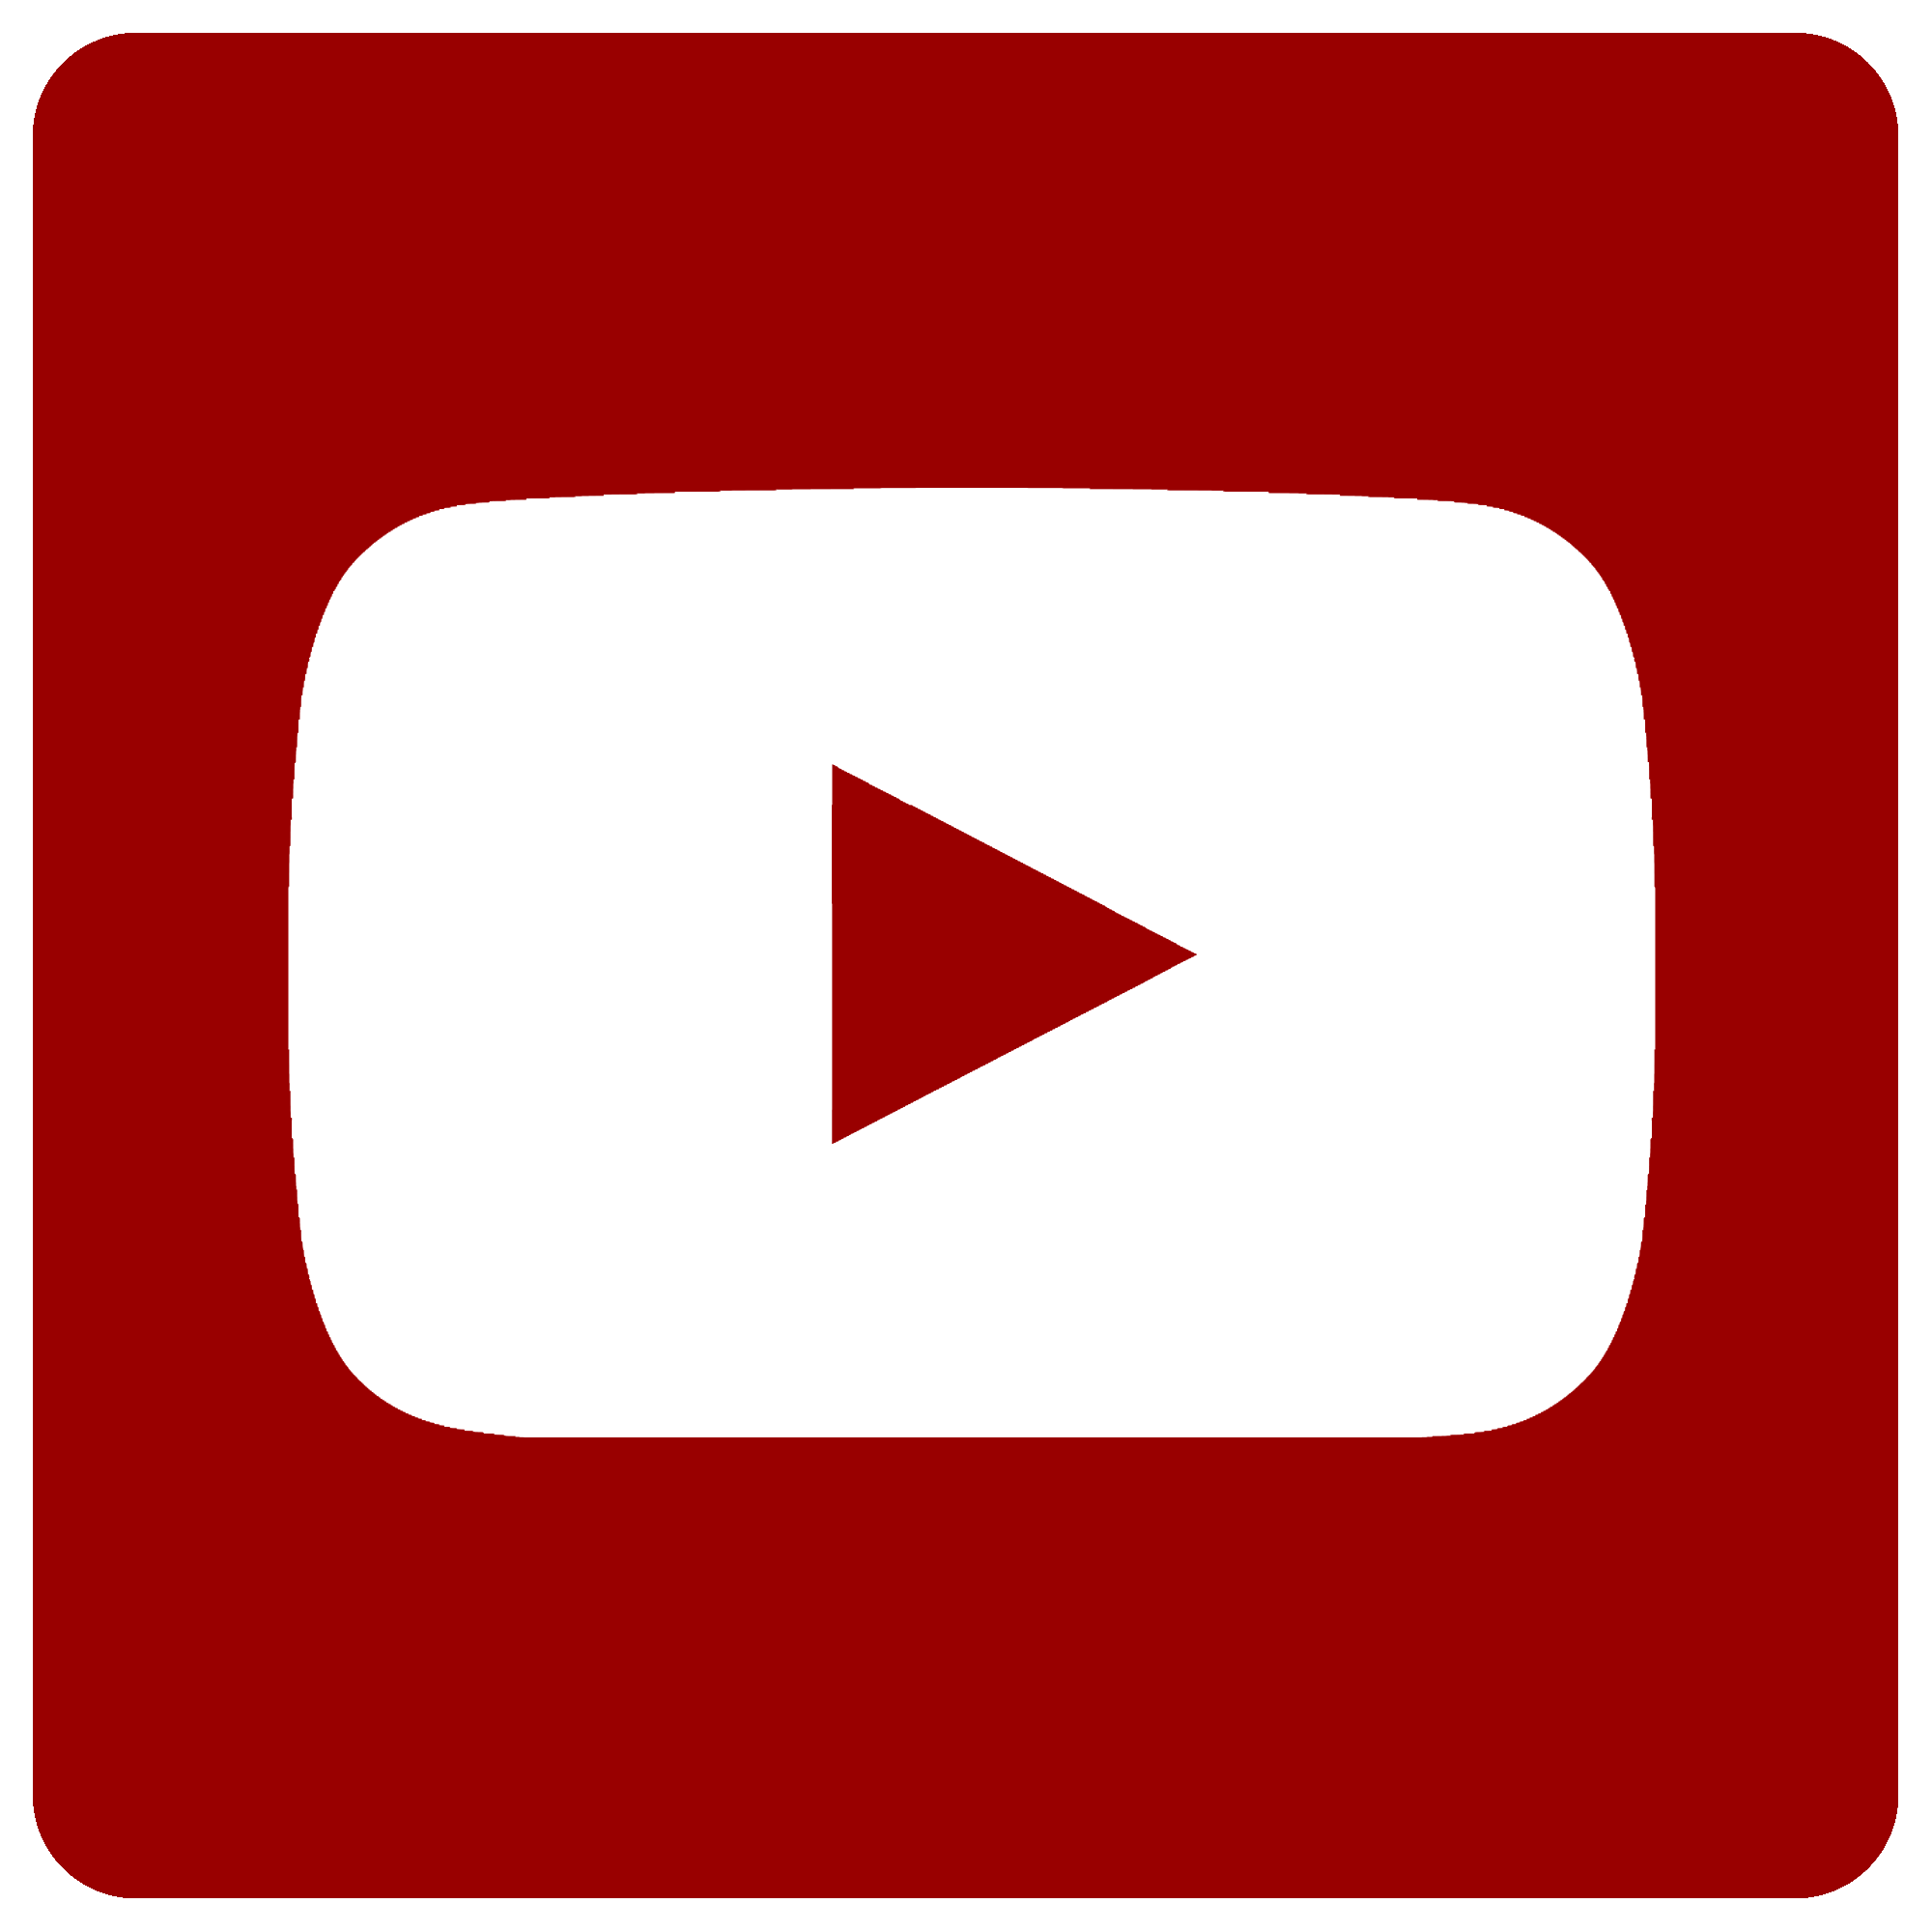 2016 New YouTube Logo - File:Youtube-logo-red.png - Wikimedia Commons